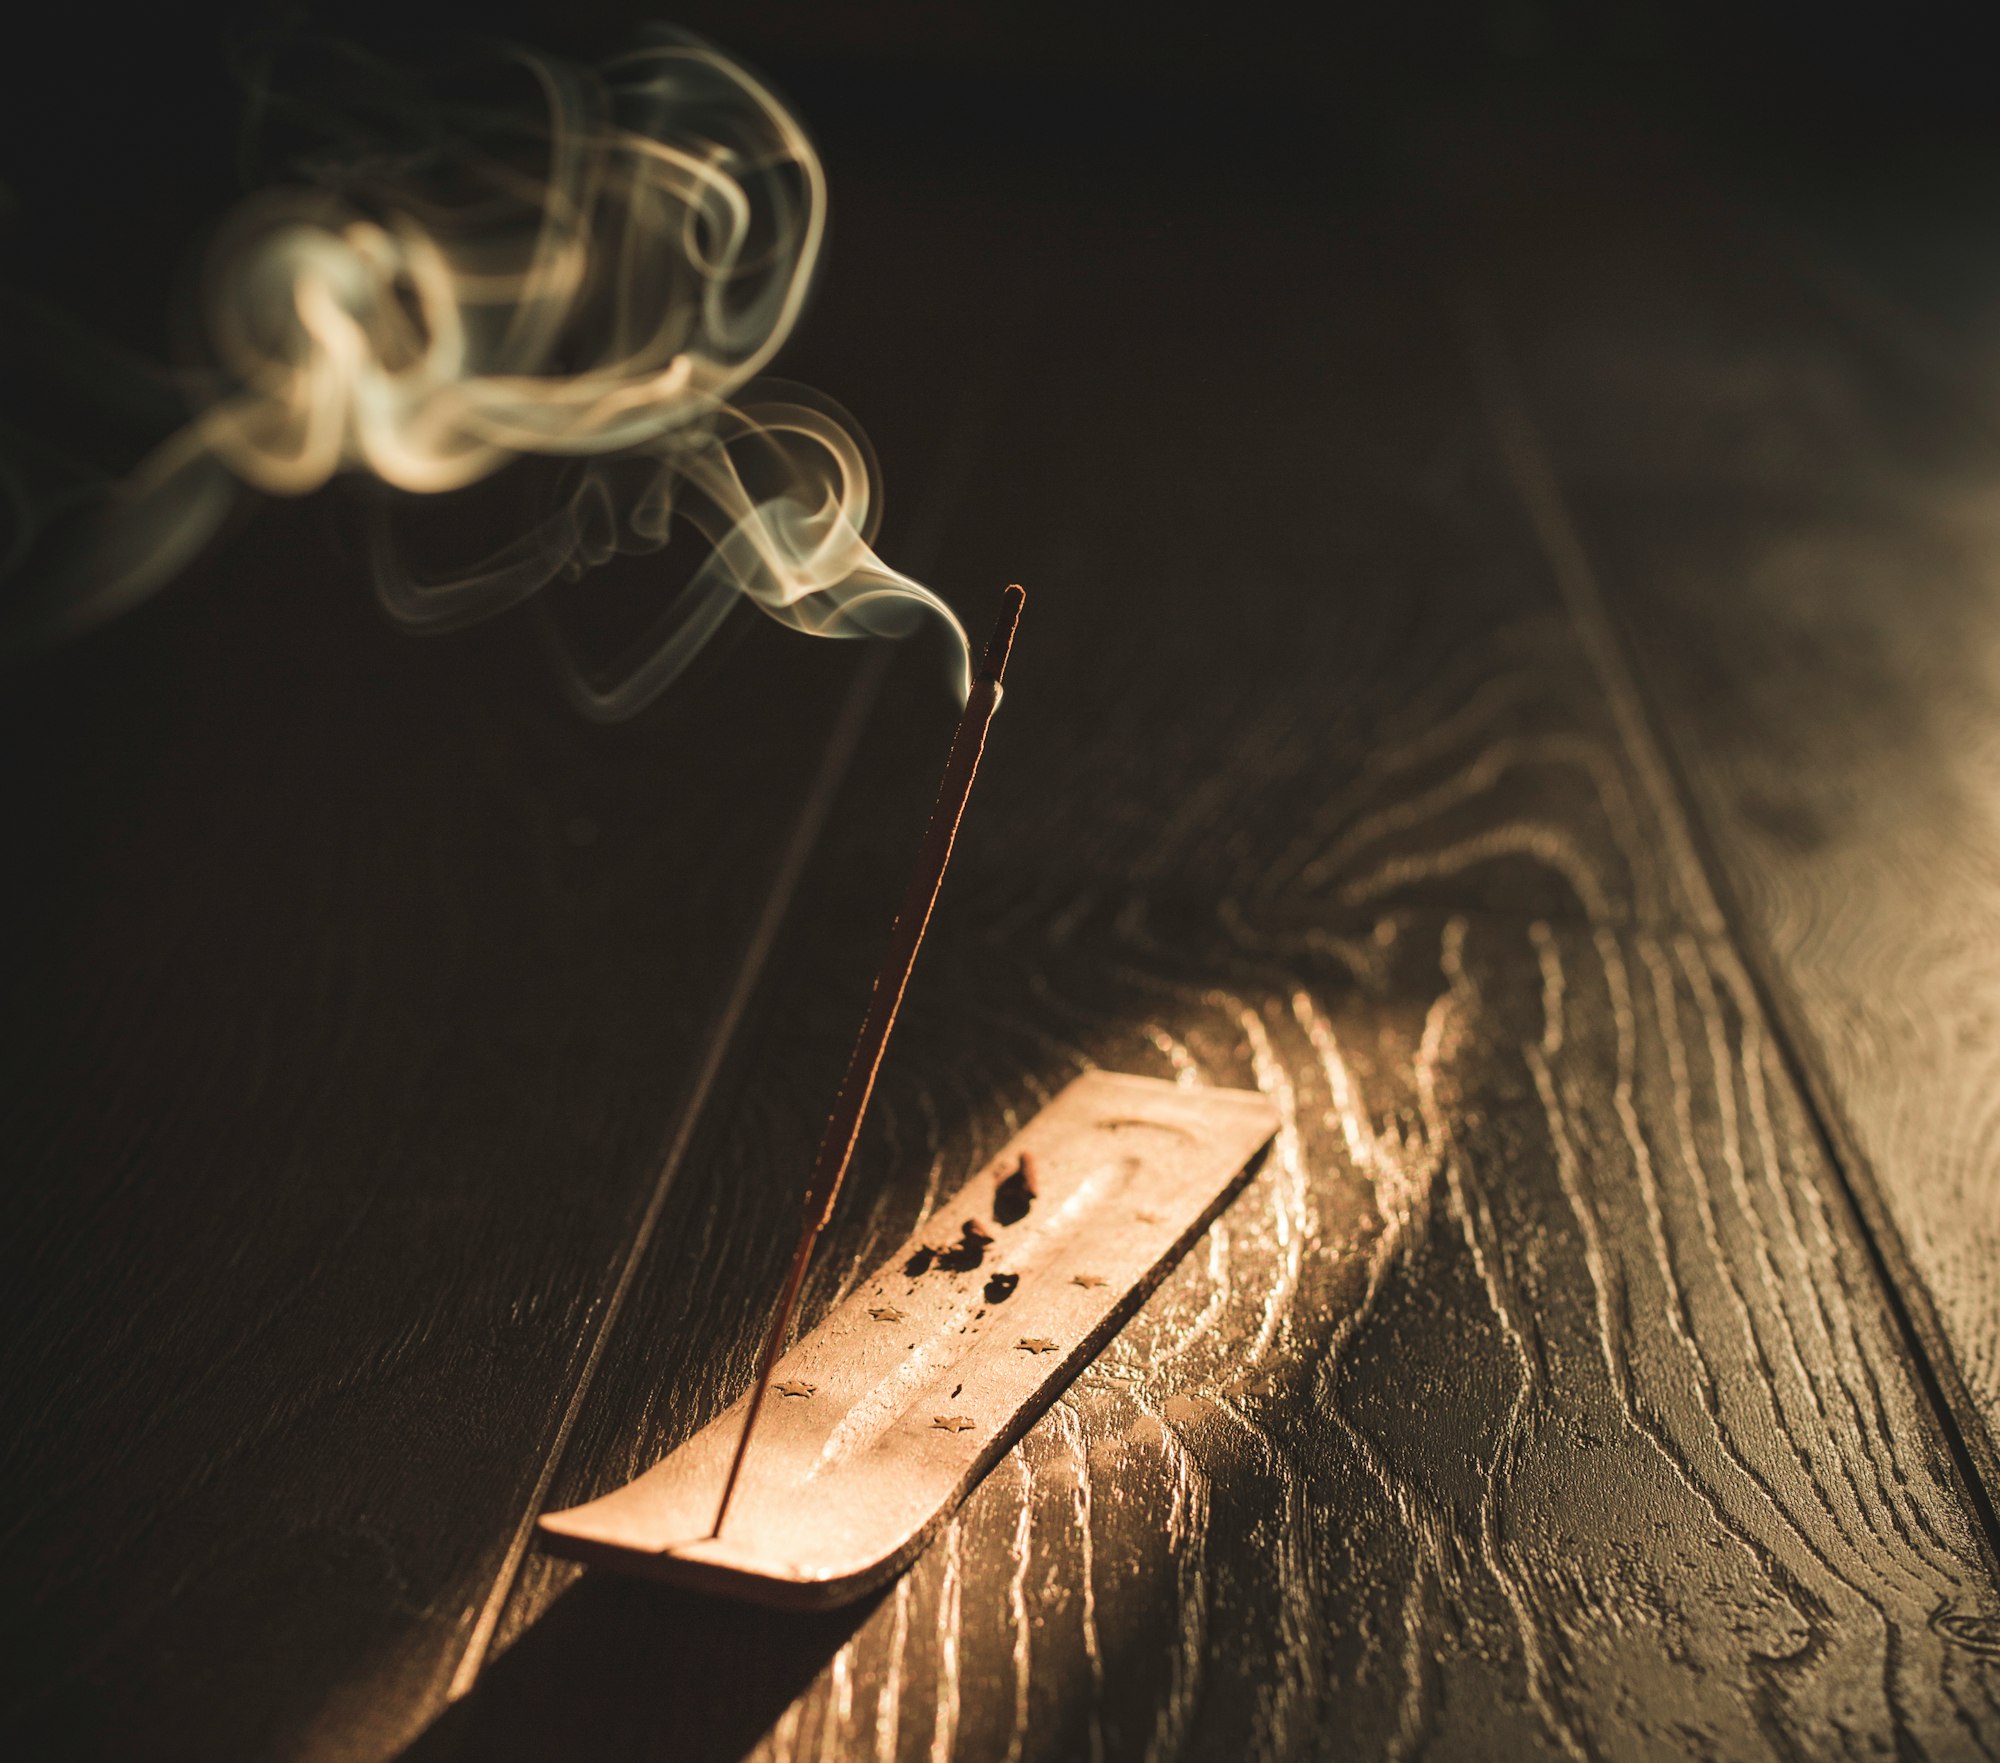 Indian masala burning incense stick with white smoke on wooden dark surface.
Say "Thanks" via PayPal :)